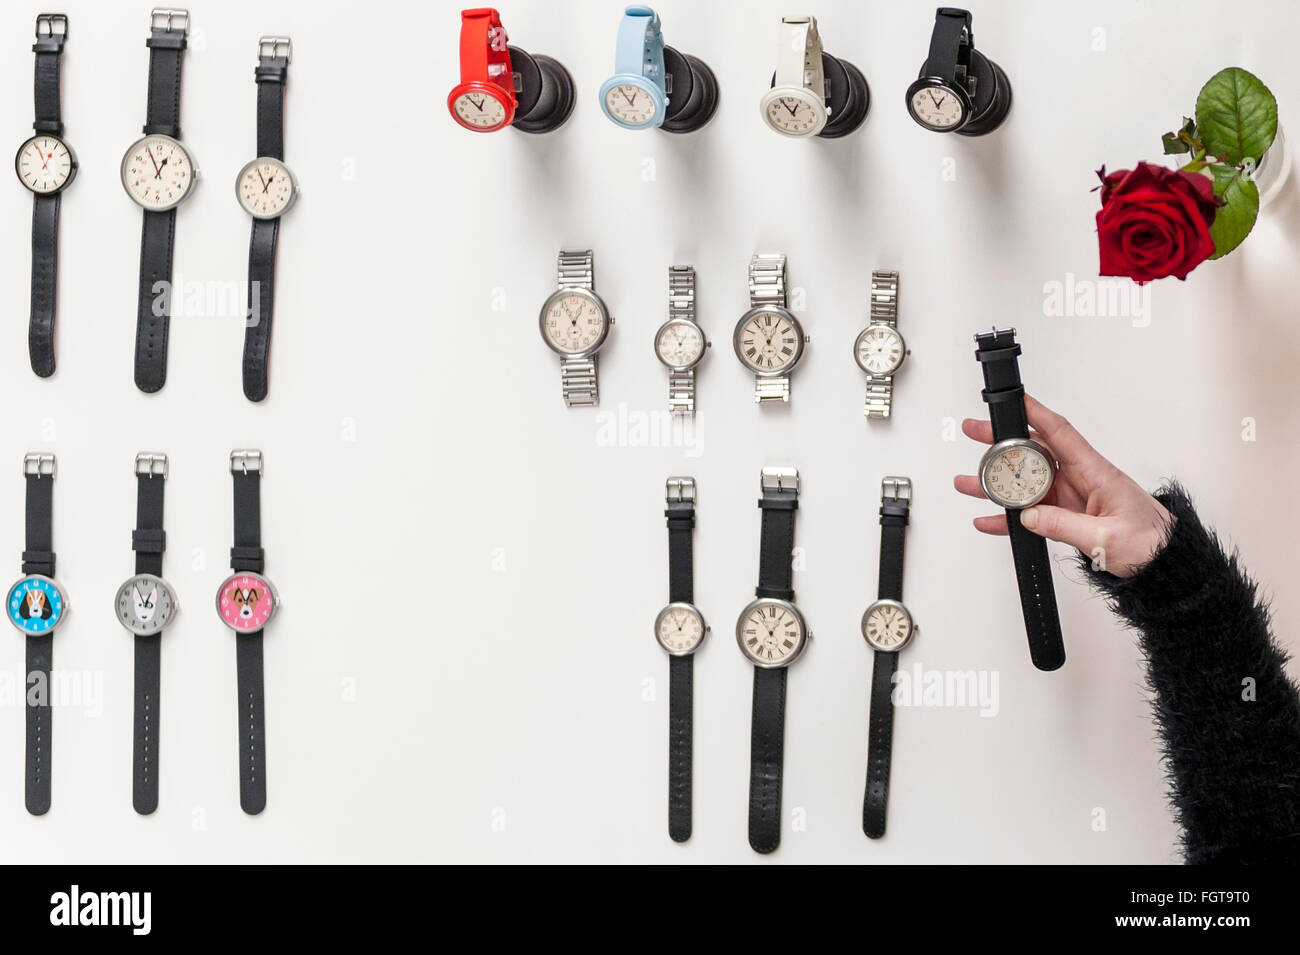 London, UK.  22 February 2016. A woman examines items by Newgate Watches, as Scoop London takes place at the Saatchi Gallery in Chelsea.  Running concurrently with London Fashion Week AW16, the show attracts fashion buyers from around the world who come to meet designers presenting their products amongst the gallery's artworks. Credit:  Stephen Chung / Alamy Live News Stock Photo